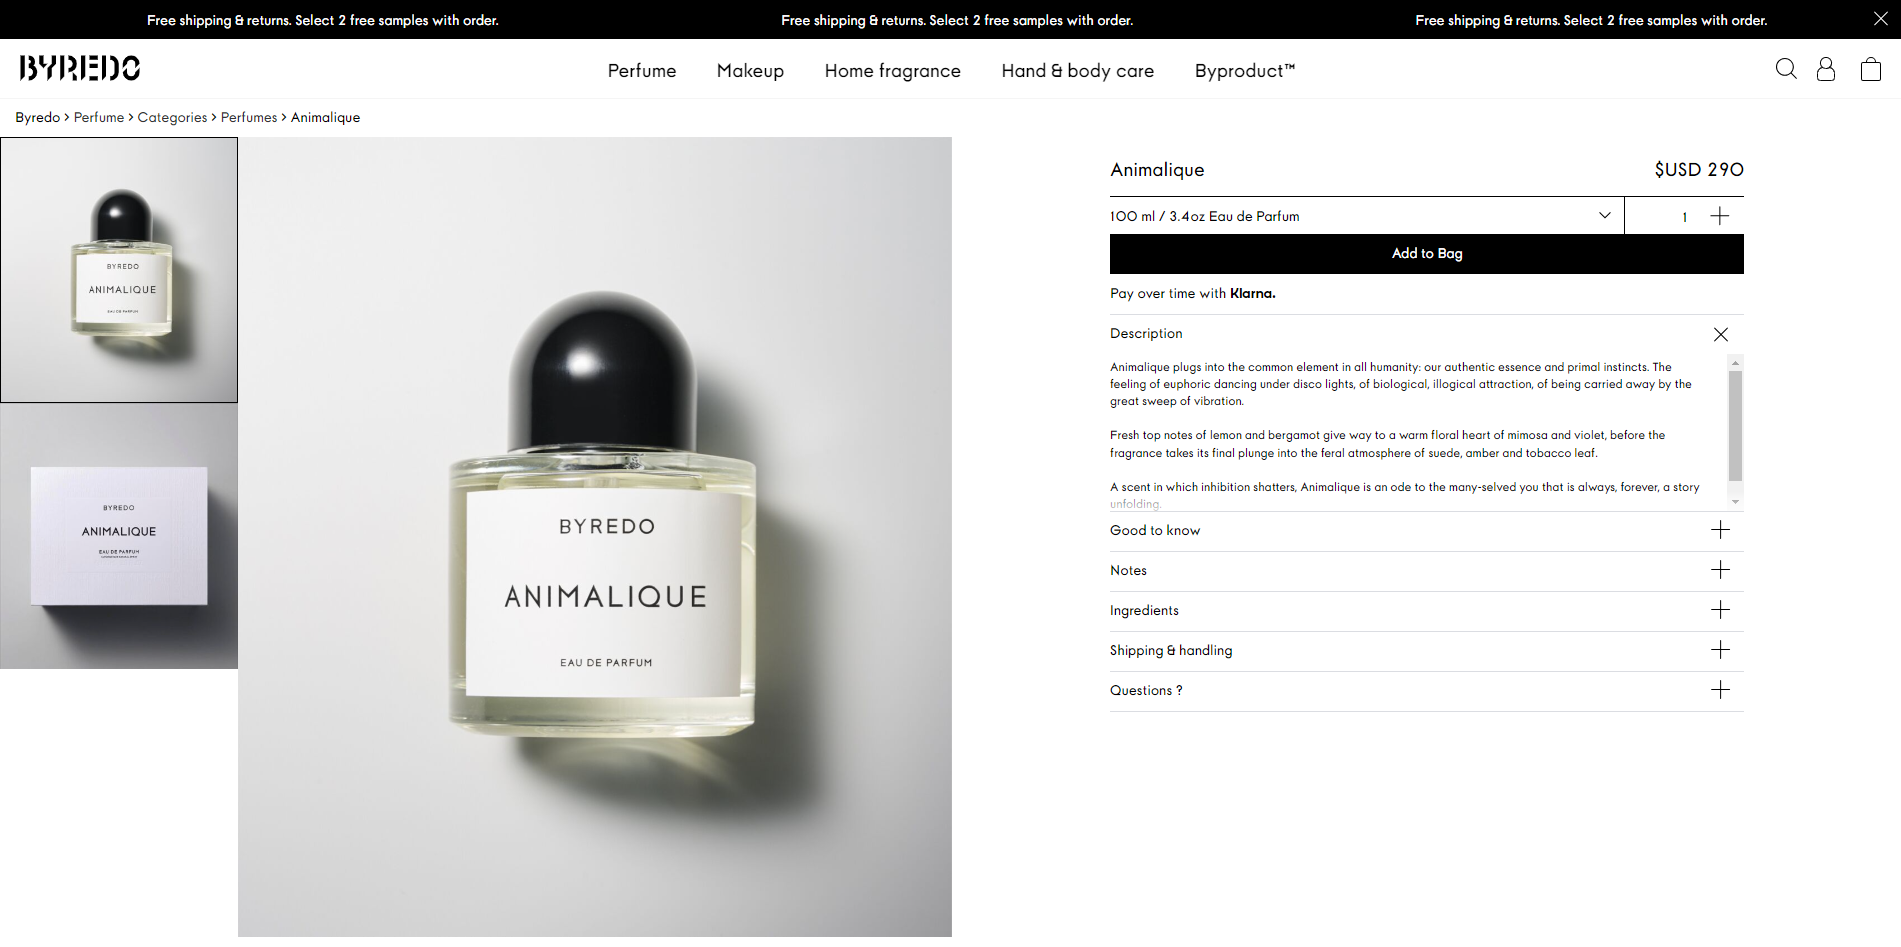 Top best eCommerce product page examples: Byredo